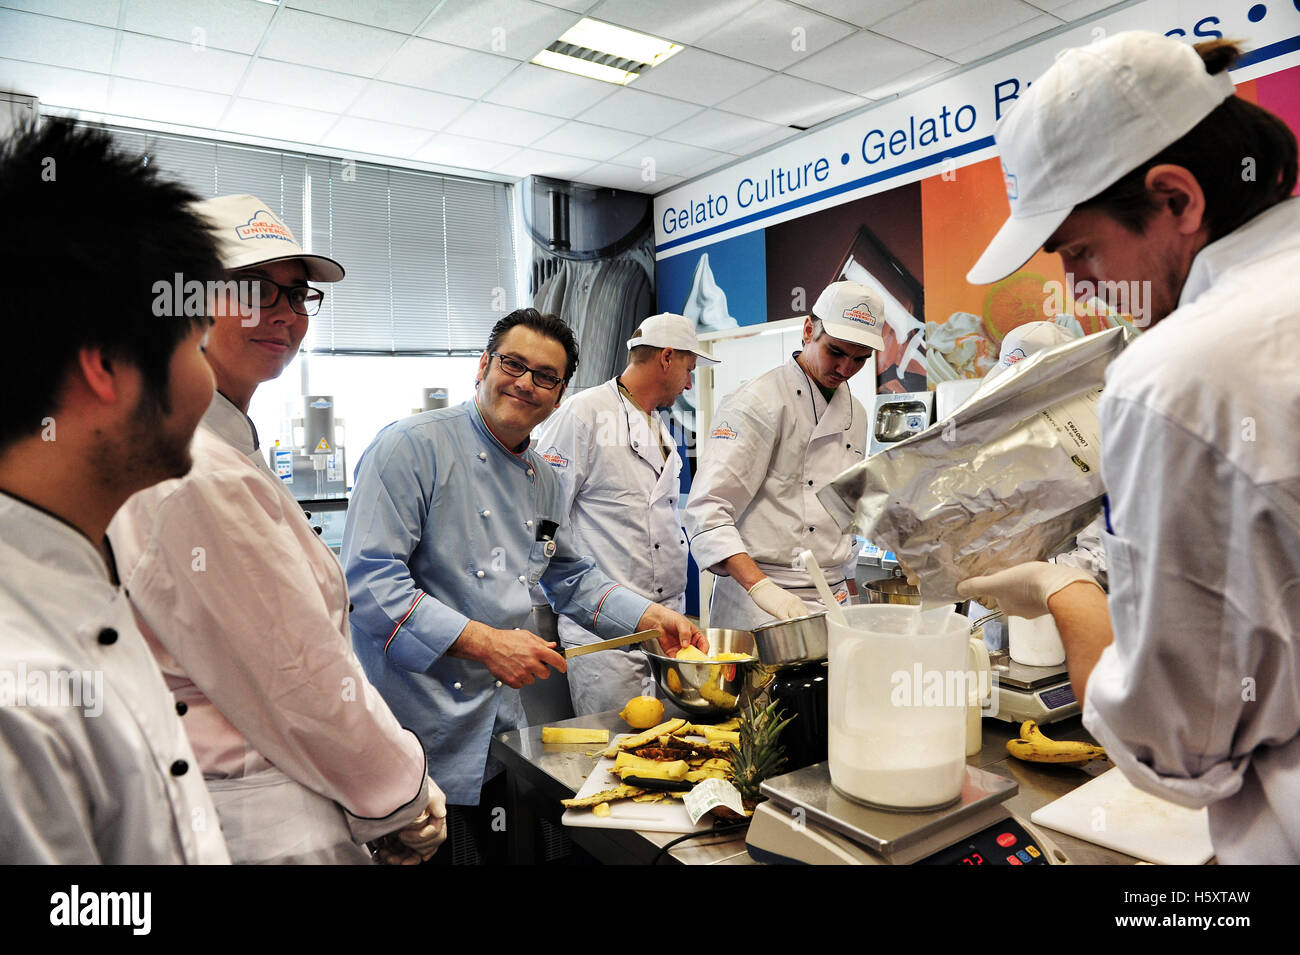 Maestro Palmiro Bruschi and his students during a practical lesson at the Carpigiani Gelato University in Italy Stock Photo